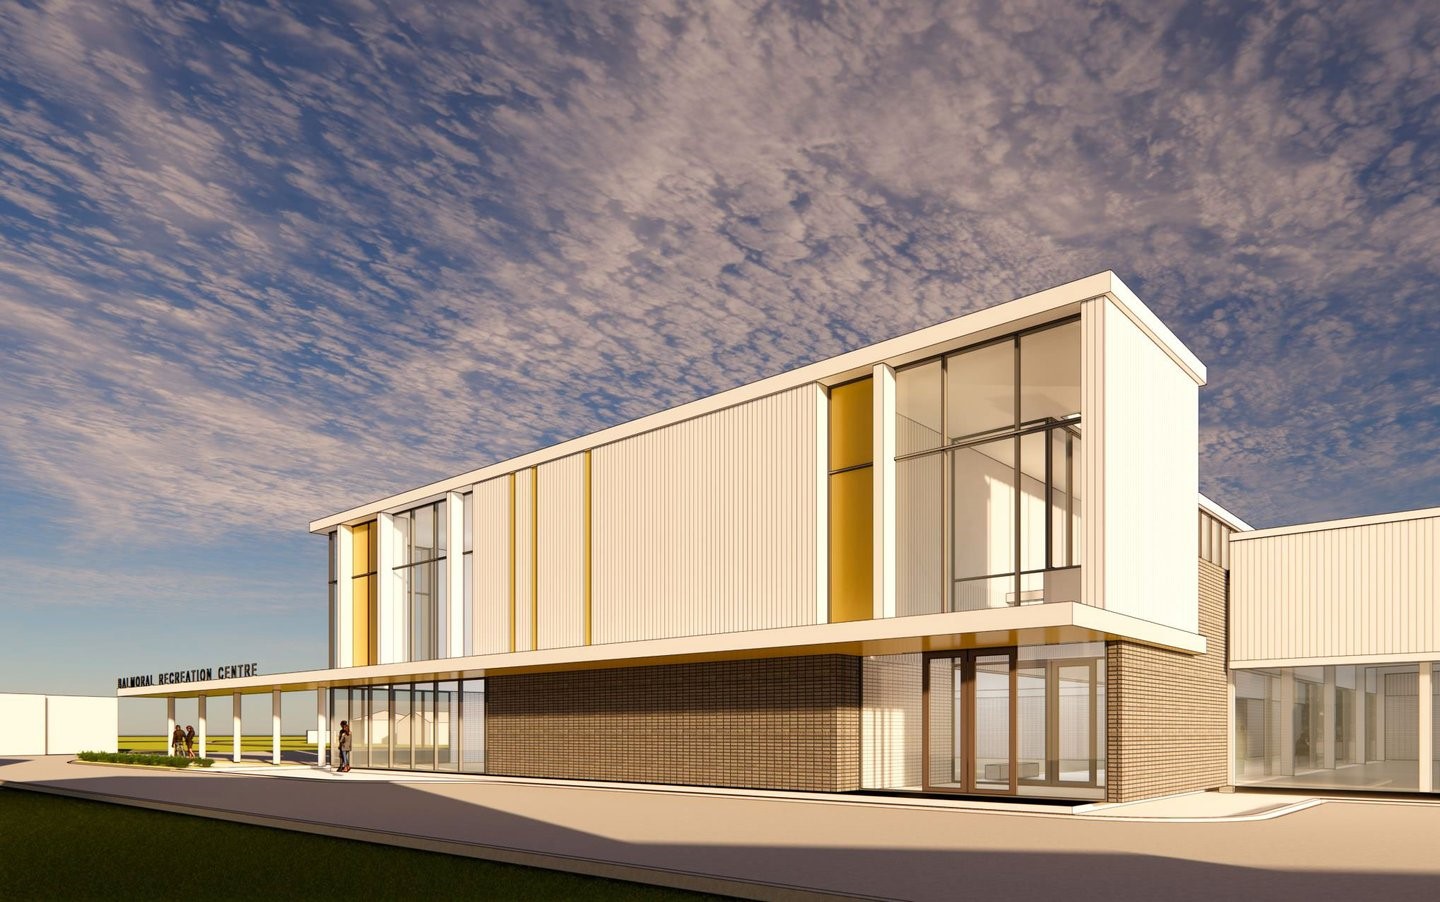 Hero Image of Addition and Renovation of Balmoral Recreation Centre